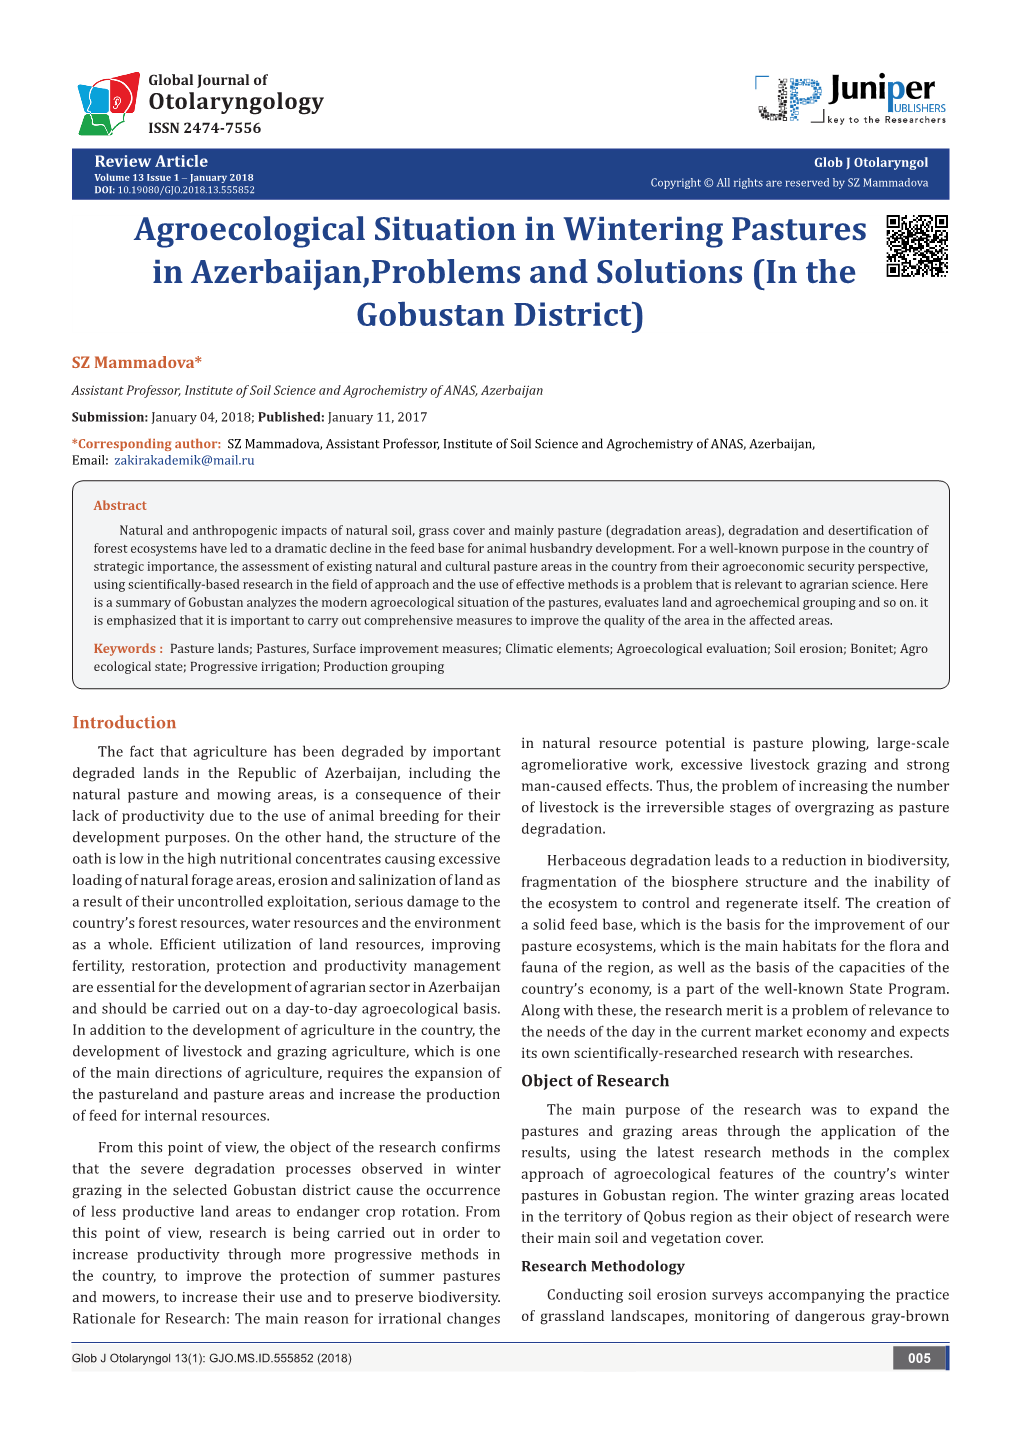 Agroecological Situation in Wintering Pastures in Azerbaijan,Problems and Solutions (In the Gobustan District)